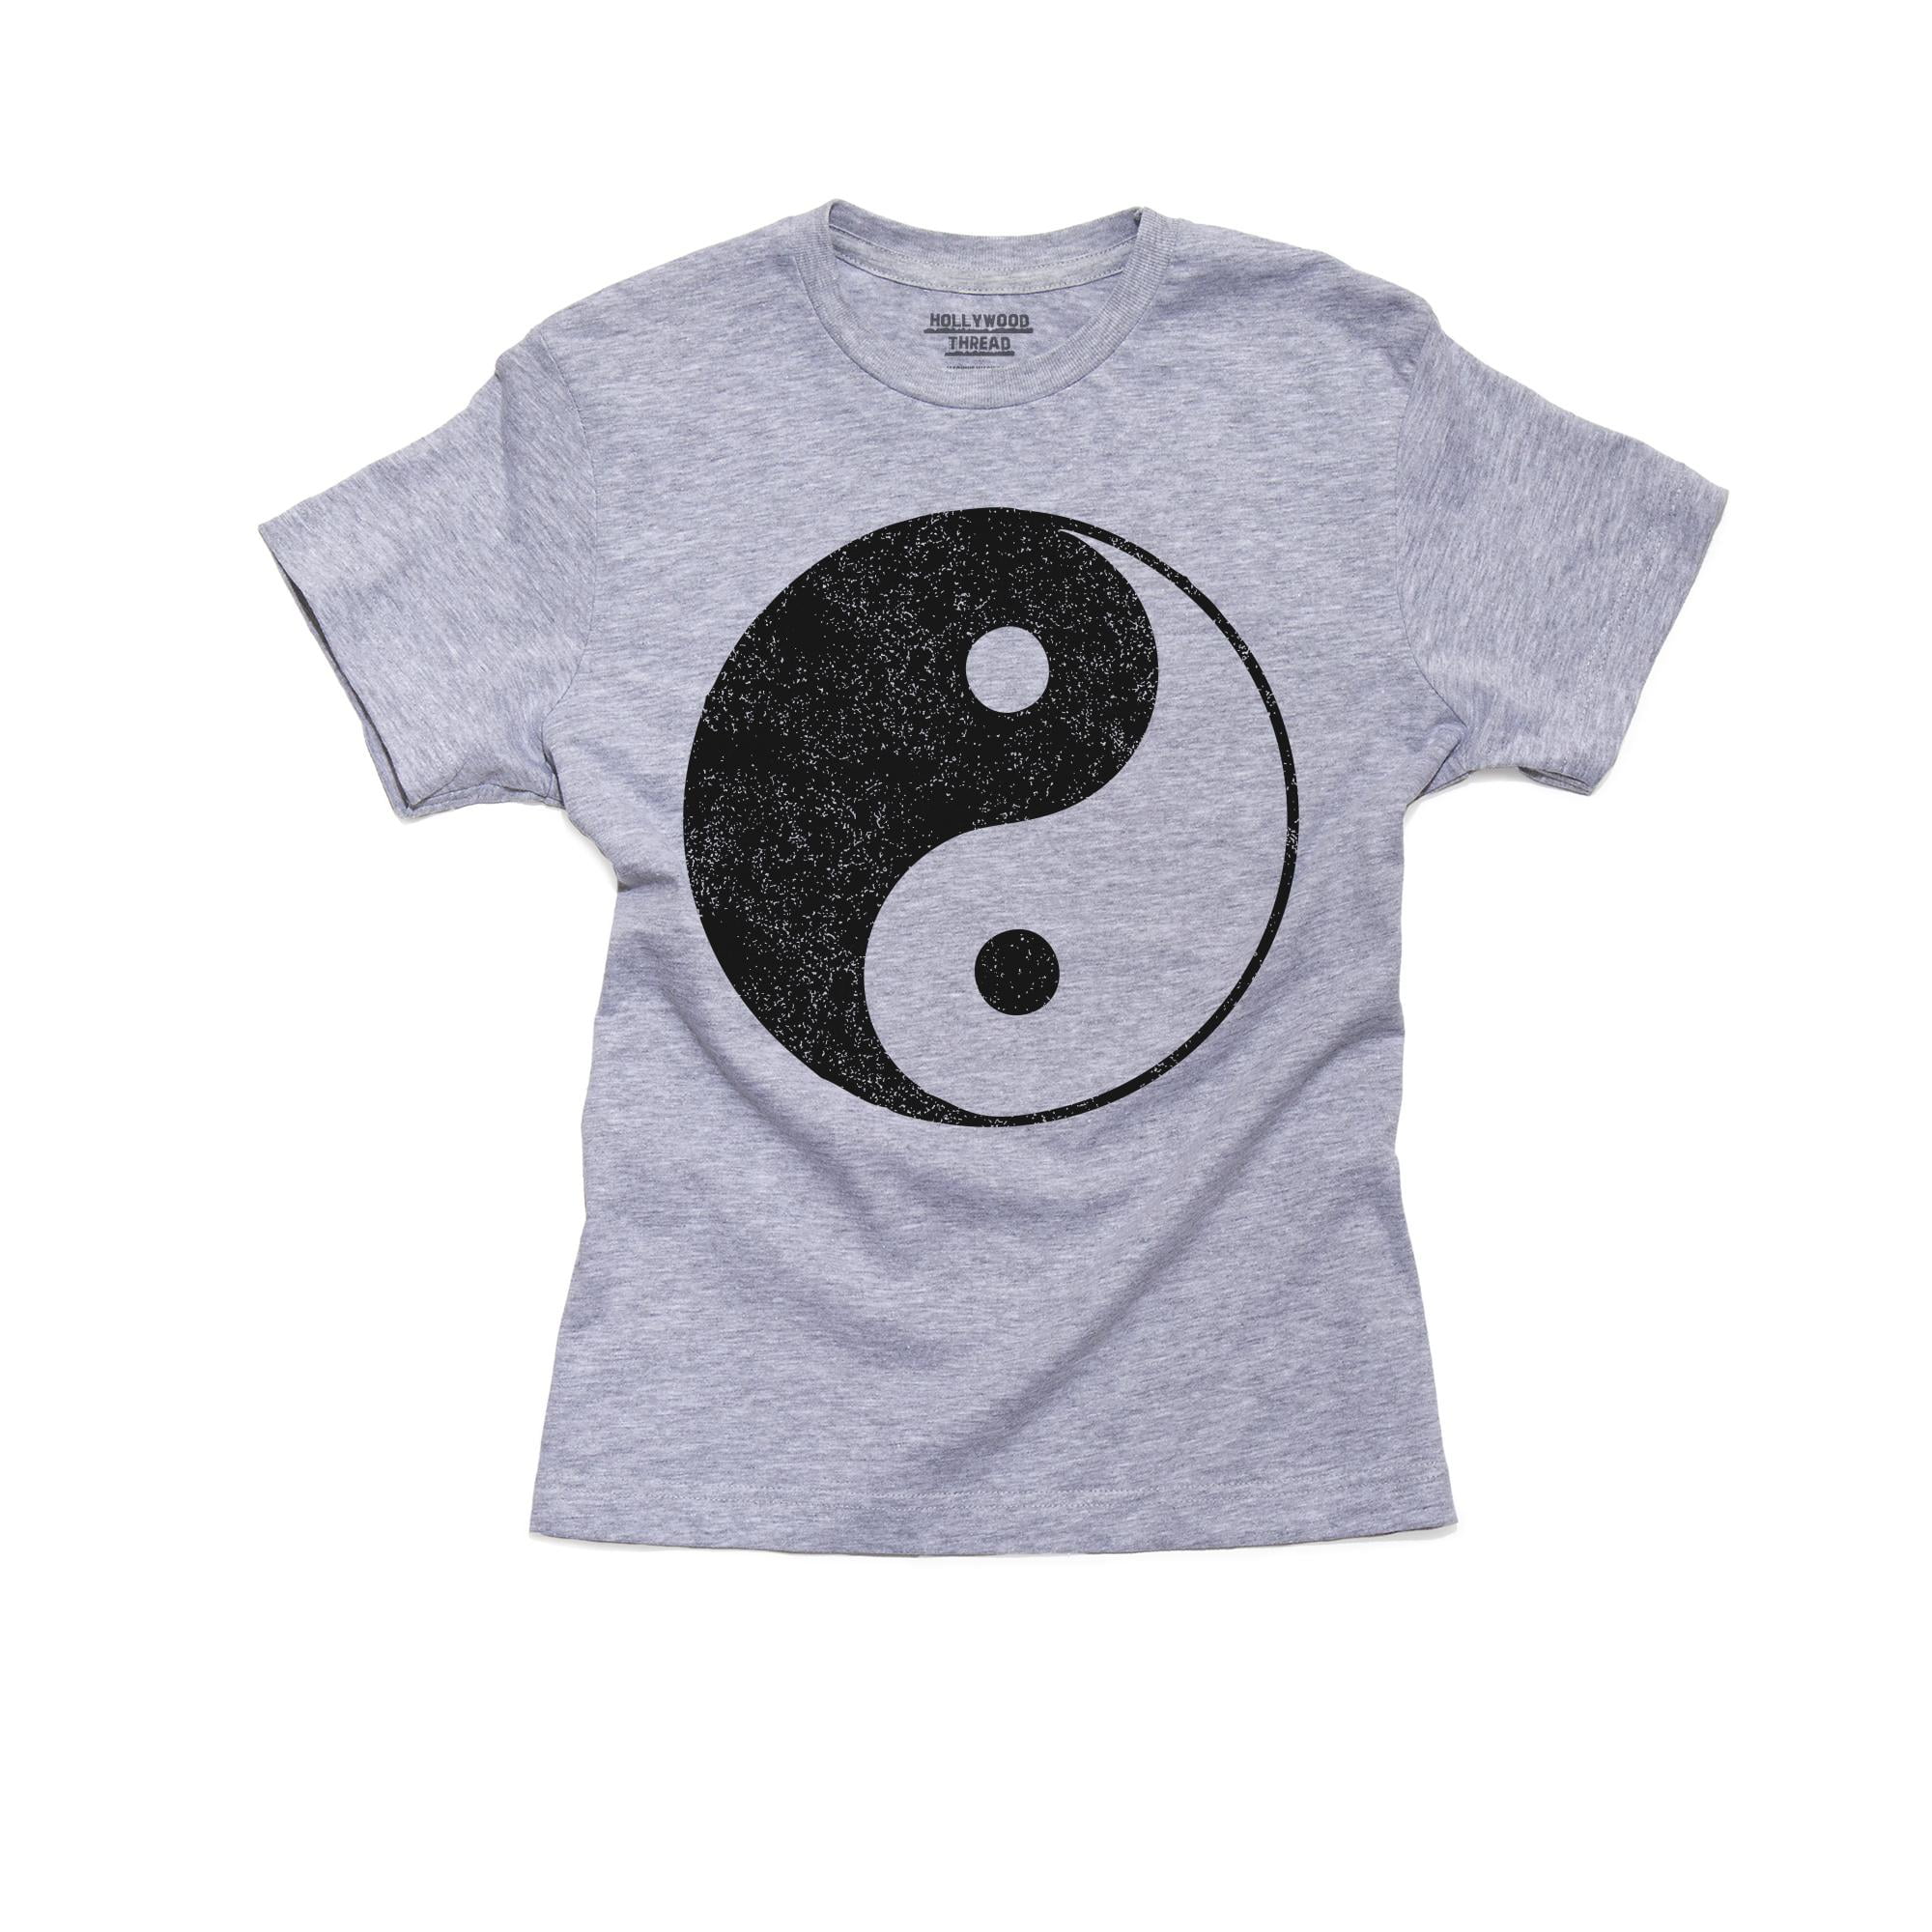 Hollywood Thread Yin Yang Chinese Philosophy Symbol For Natural Harmony Boy S Cotton Youth Grey T Shirt Walmart Com Walmart Com - chinese pants roblox black and white